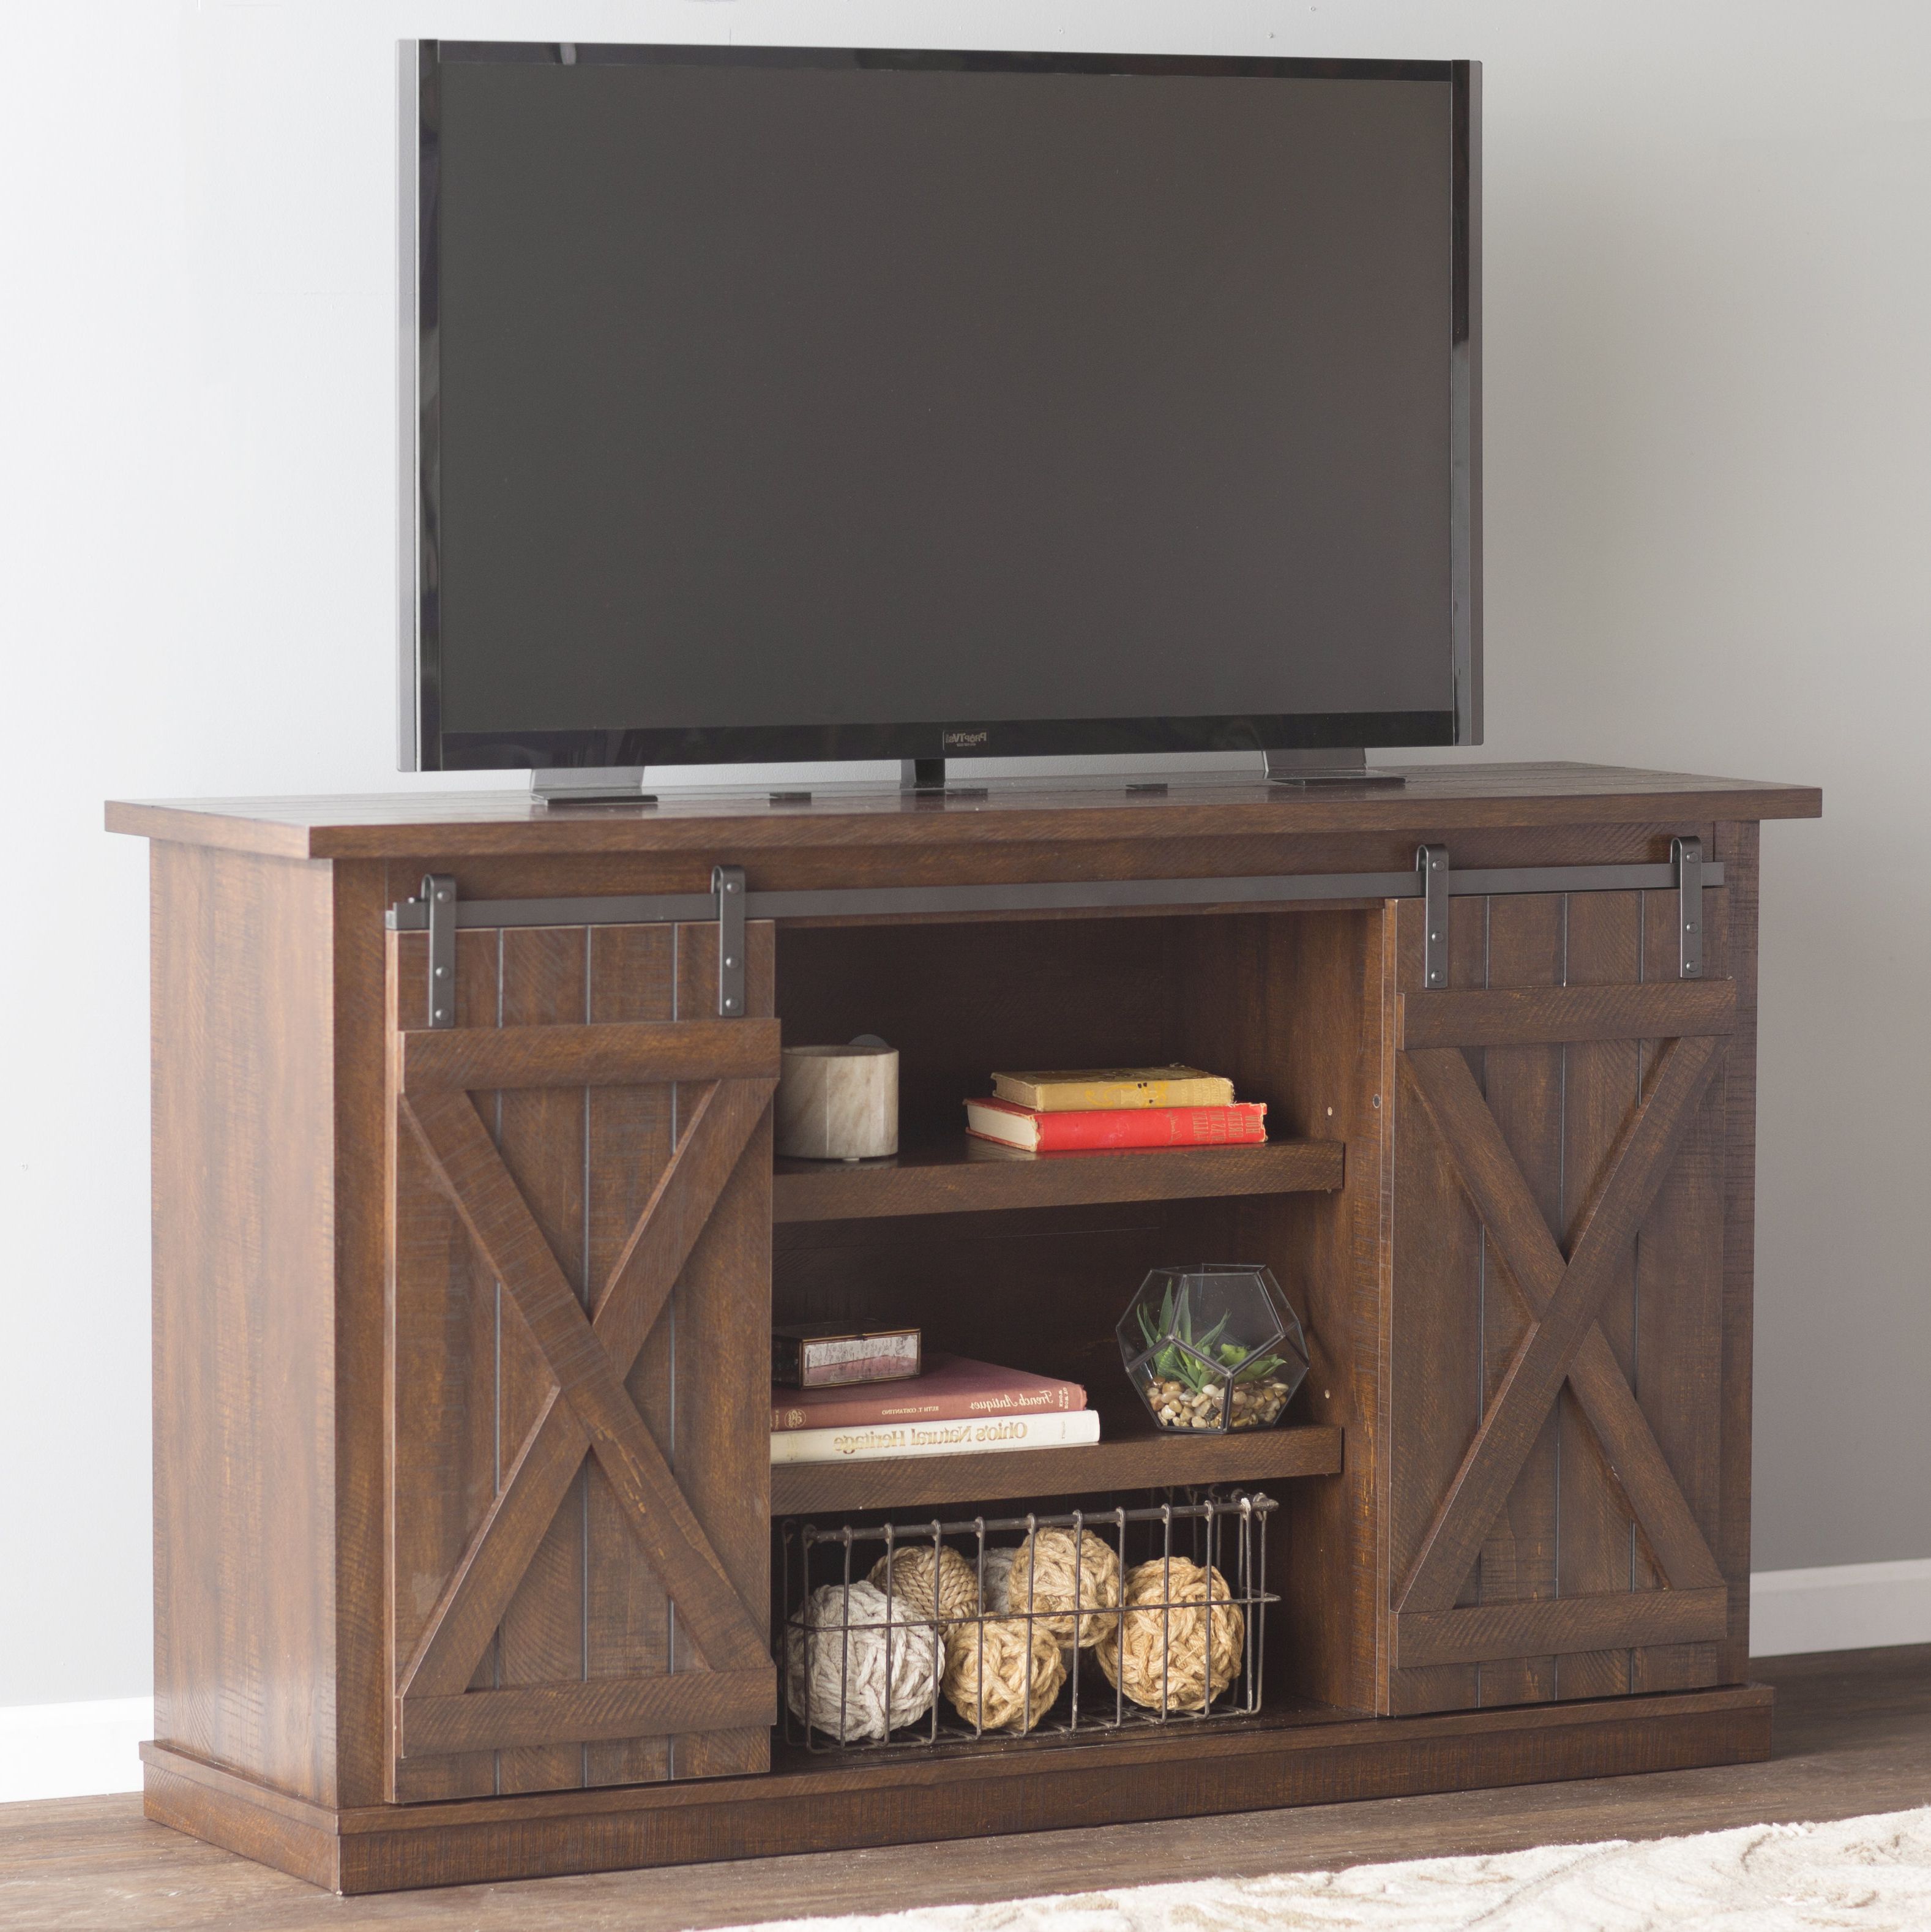 Current Rustic Tv Stands & Entertainment Centers You'll Love (View 11 of 20)